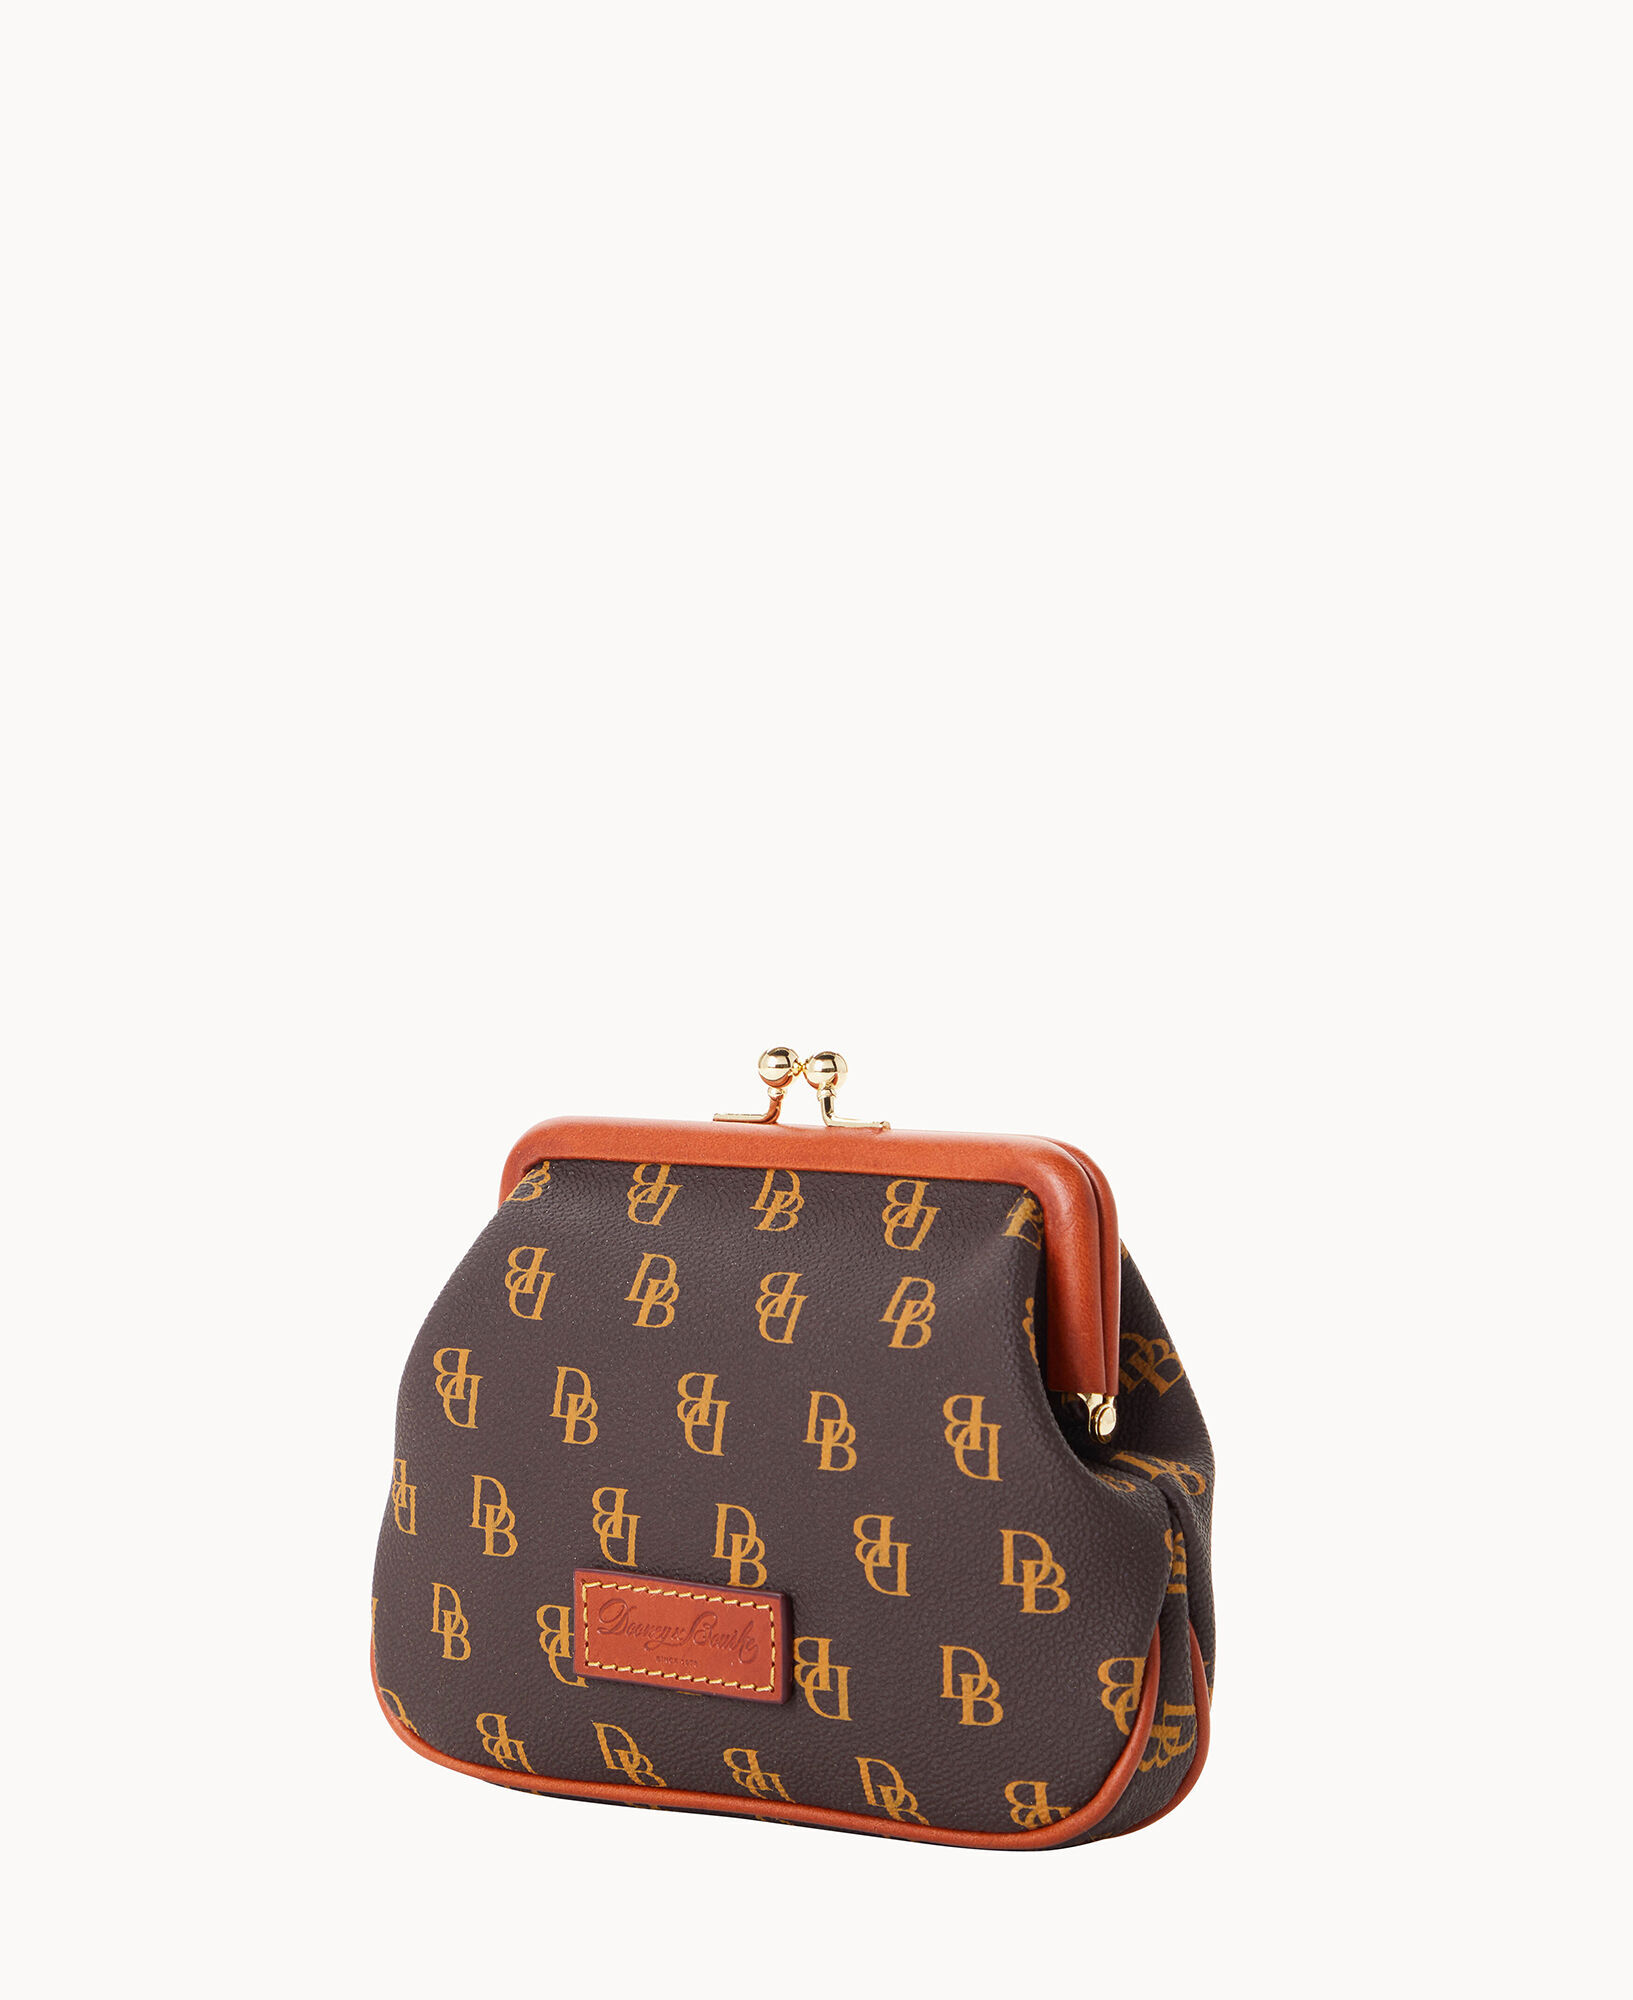 Help me choose my first LV bag! I don't carry much in my bag, only a phone  / card holder / lip balm usually : r/Louisvuitton